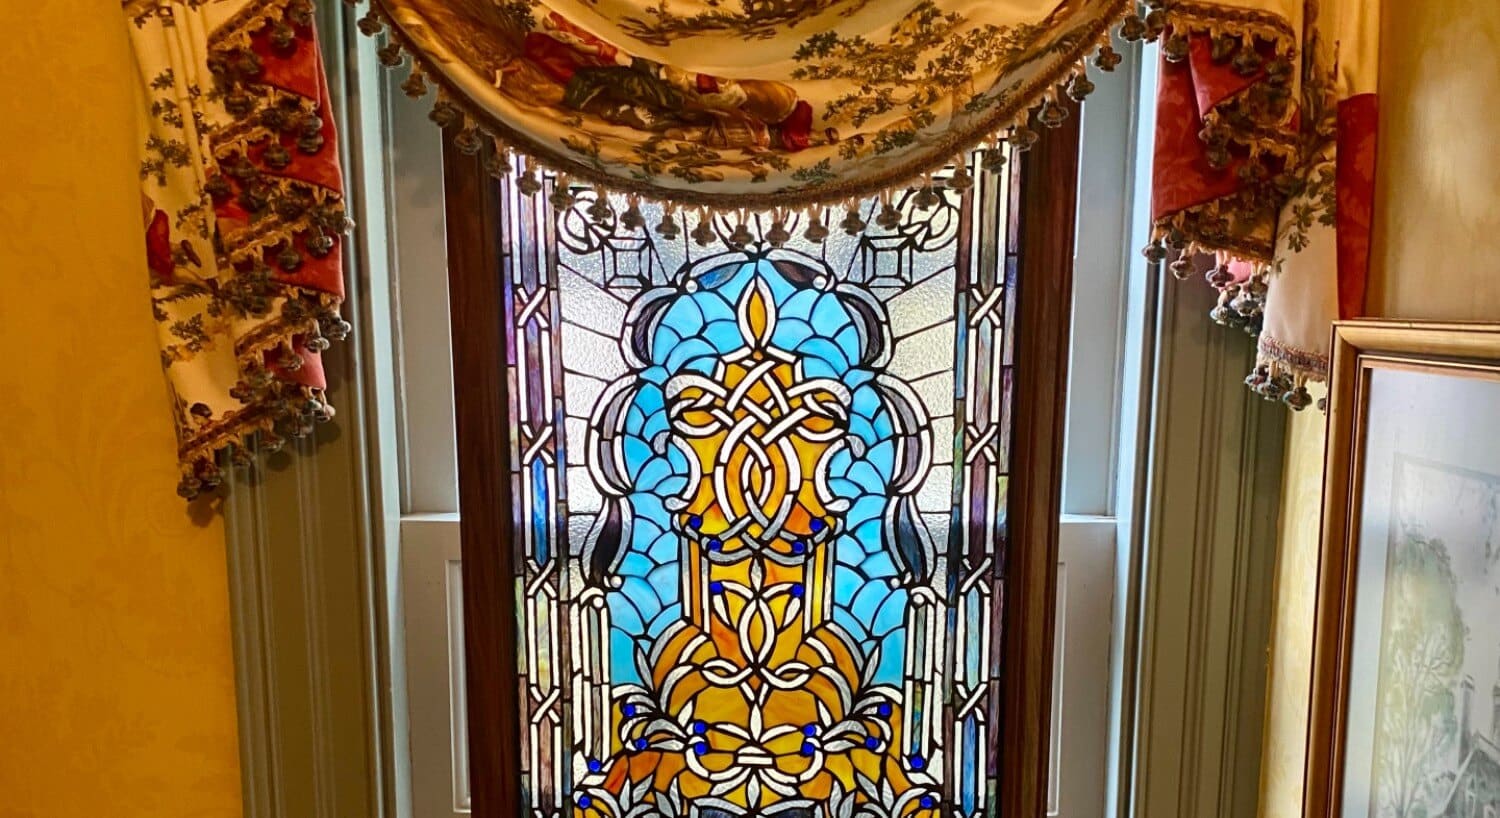 Beautiful stained glass window with a floral curtain valence draped at the top